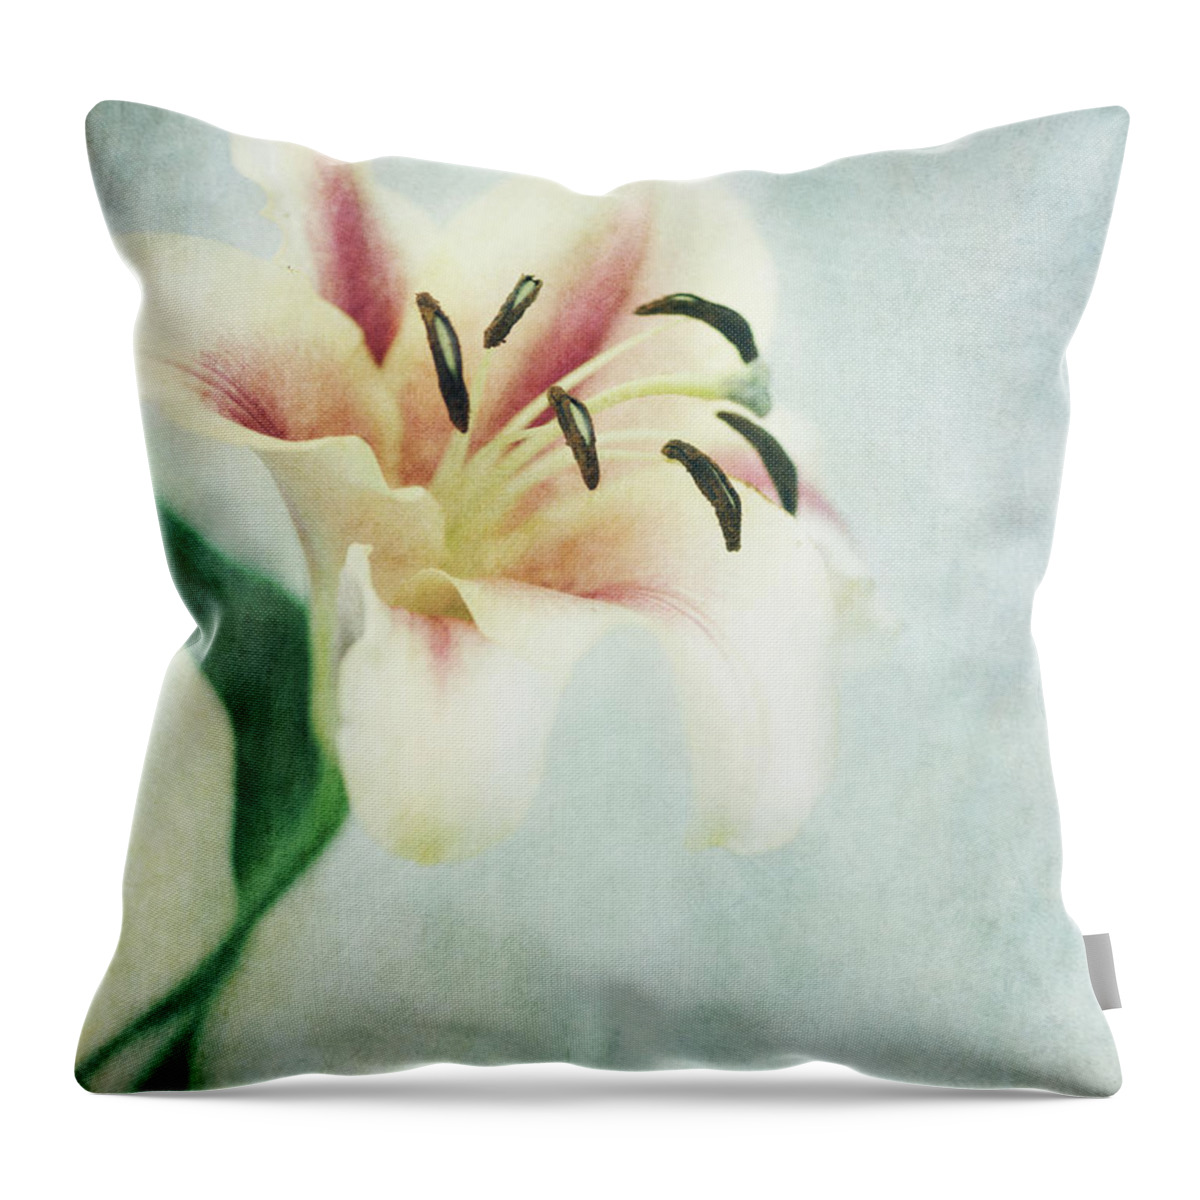 Lily Throw Pillow featuring the photograph Lilium by Priska Wettstein